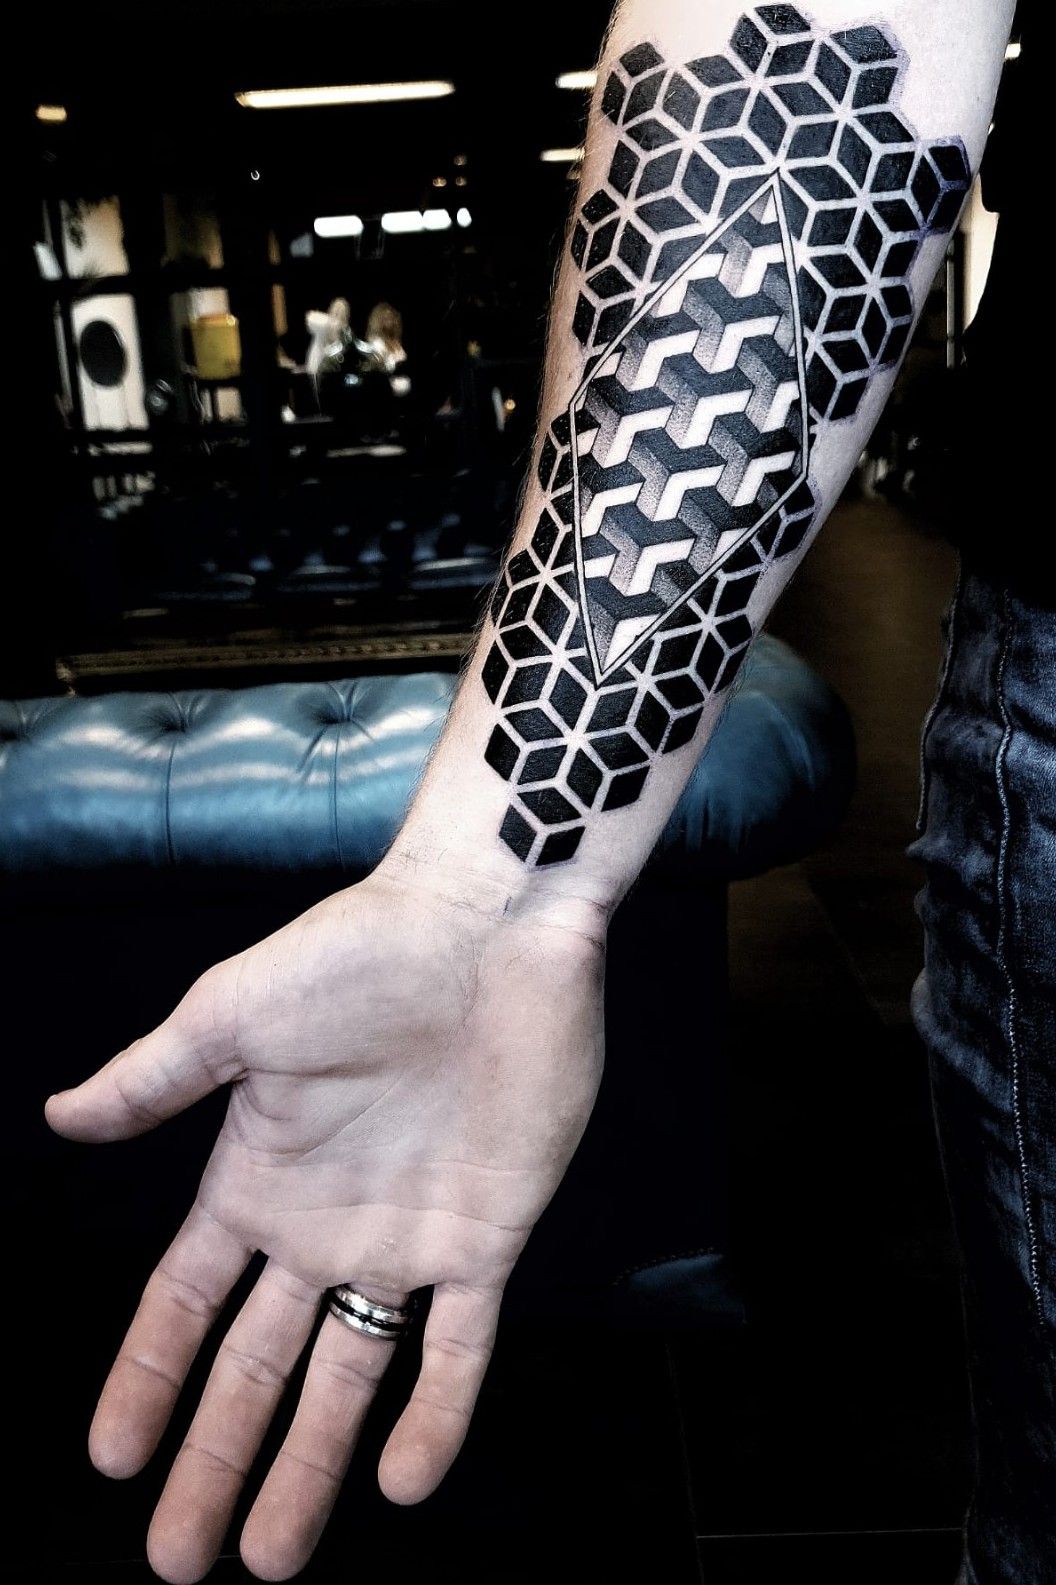 96 Exquisite Geometric Tattoos To Outline Your Creativity  Bored Panda